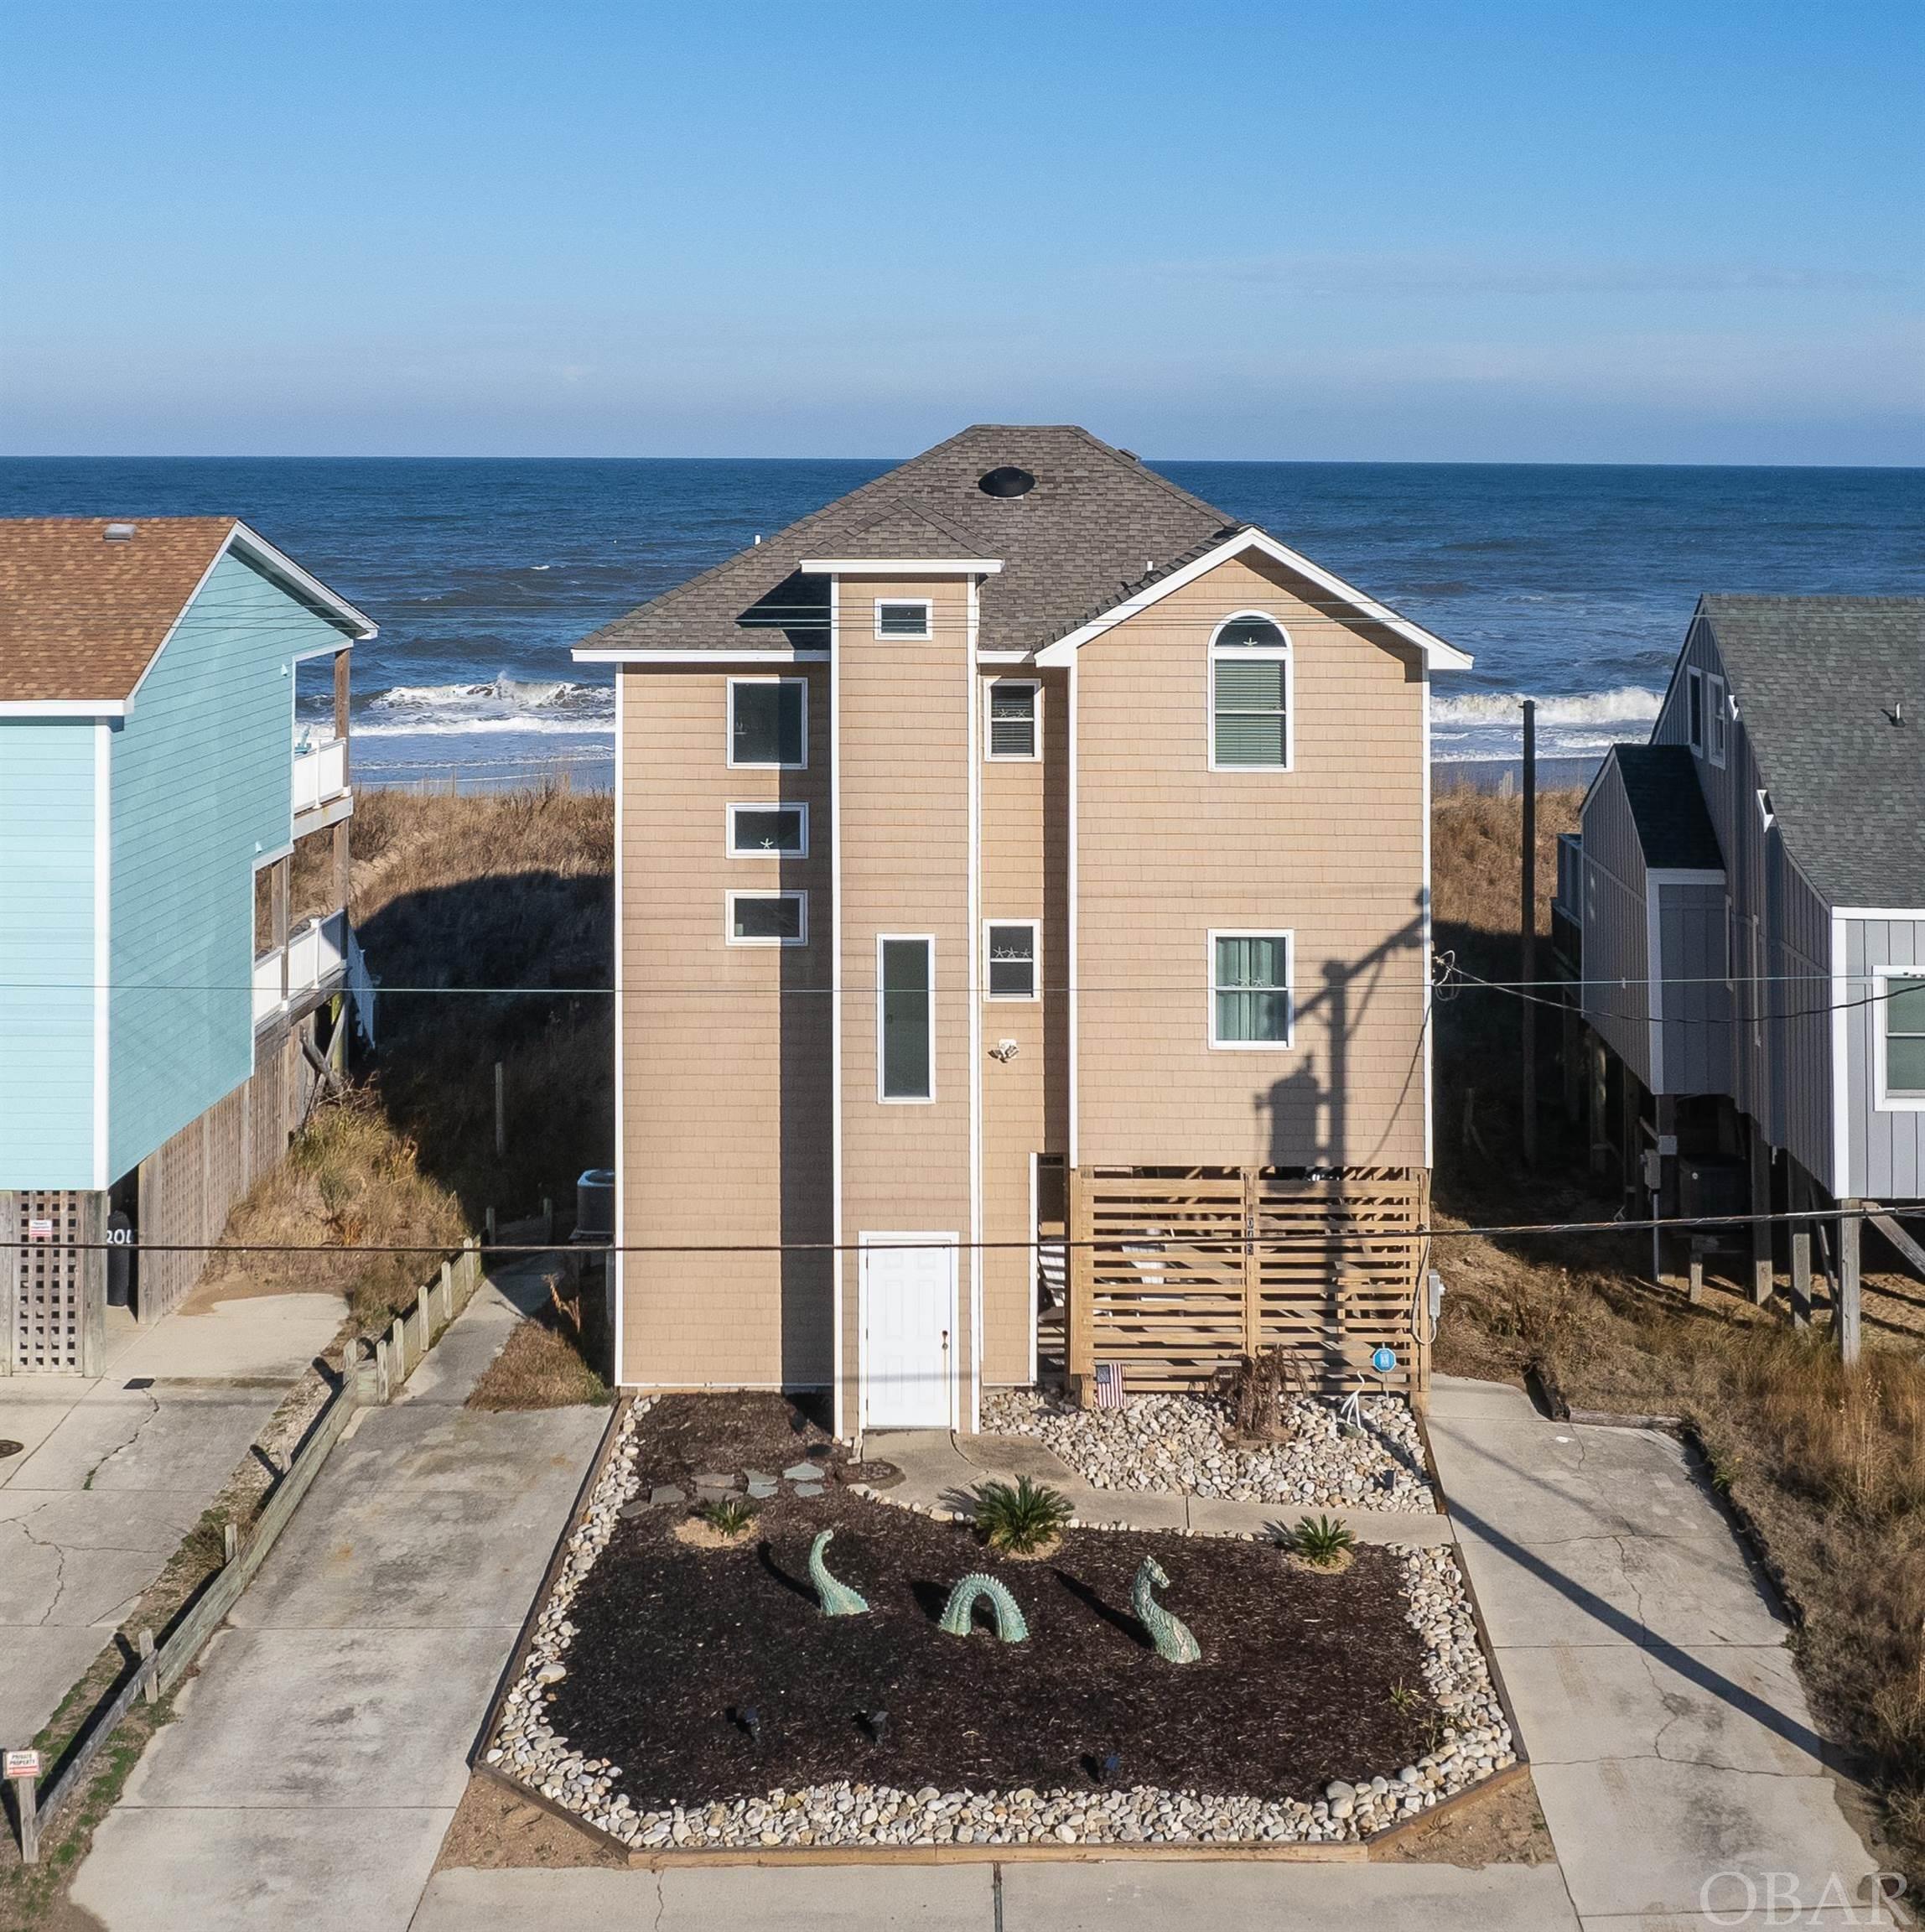 This beautifully updated, 3 bedroom oceanfront home has 2 additional bonus rooms with closets and is nestled in a vegetative beach dune in the heart of Kill Devil Hills. Located just south of the Avalon Fishing Pier, you are steps to shopping, dining and festive night life.  Bask in the oceanfront, oversized sun deck or cross boardwalk over dune onto the beach where you can surf, swim or fish in your backyard. Exquisite 2021 kitchen caters to your inner gourmet chef with luxurious appliances by Wolf. Prepare fresh seafood in the convection steam oven, crisp veggies on gas cooktop or warm up dessert in built-in microwave drawer. LG Stainless steel refrigerator has bonus glass door on front for drinks and snacks.  Full overlay custom cabinetry by JEK features full extension, slow close, dovetail drawers, solid wood cabinet doors and a crisp shaker white finish. Much love and thought was poured into new luxury vinyl plank flooring, custom tile showers and bathroom floors, new vanities, faucets, interior doors, trim, paint, custom blinds and luxurious furnishings that capture the essence of elegant beach decor.  Ride elevator or take stairs to Top-level which boasts vaulted ceilings and copious ocean views. The en-suite bedroom has iridescent inlayed accent tile shower. Down the hall, there are two gracious bedrooms that share hall bath with custom tile shower.  Mid-level sits just above dune for gracious ocean views from kitchen, dry bar and living room.  Hall bathroom with custom tile shower passes through to oversized guest bedroom.  Ground level has game room with closet, bathroom with tub/shower and stacked washer and dryer.   Go straight from the beach to the unheated half bath near outdoor shower.  Ground level storage shed and storage box convey.   Tax records show 5 bedrooms and 4 baths.